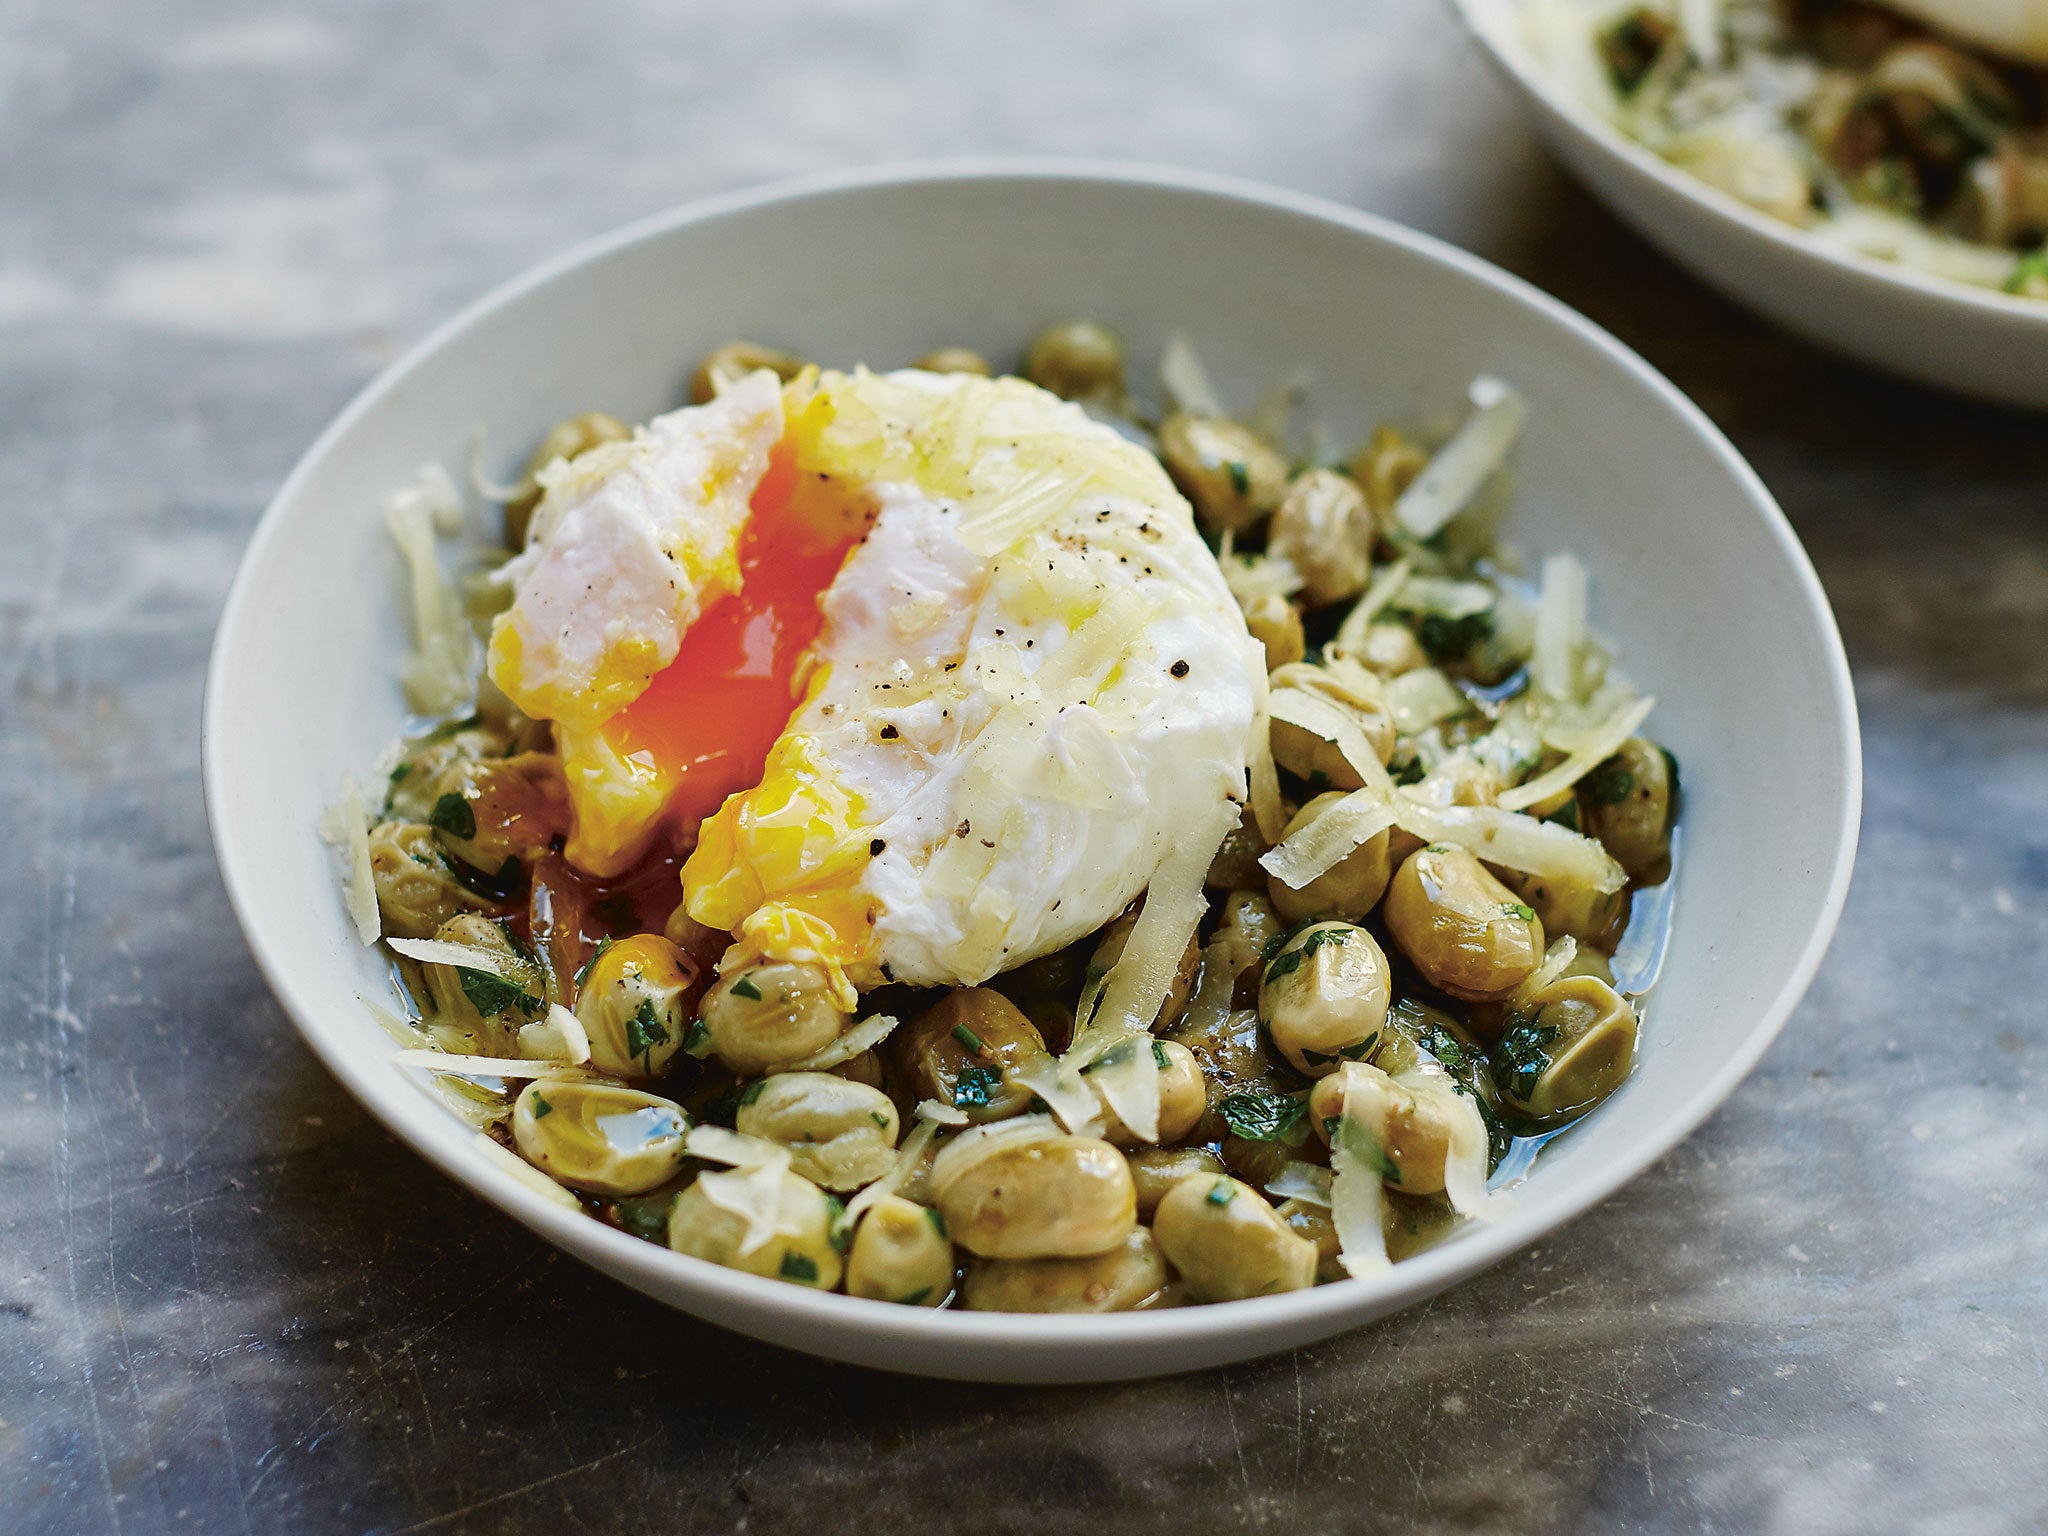 José's dish of broad beans and poached egg is popular in the Basque Country